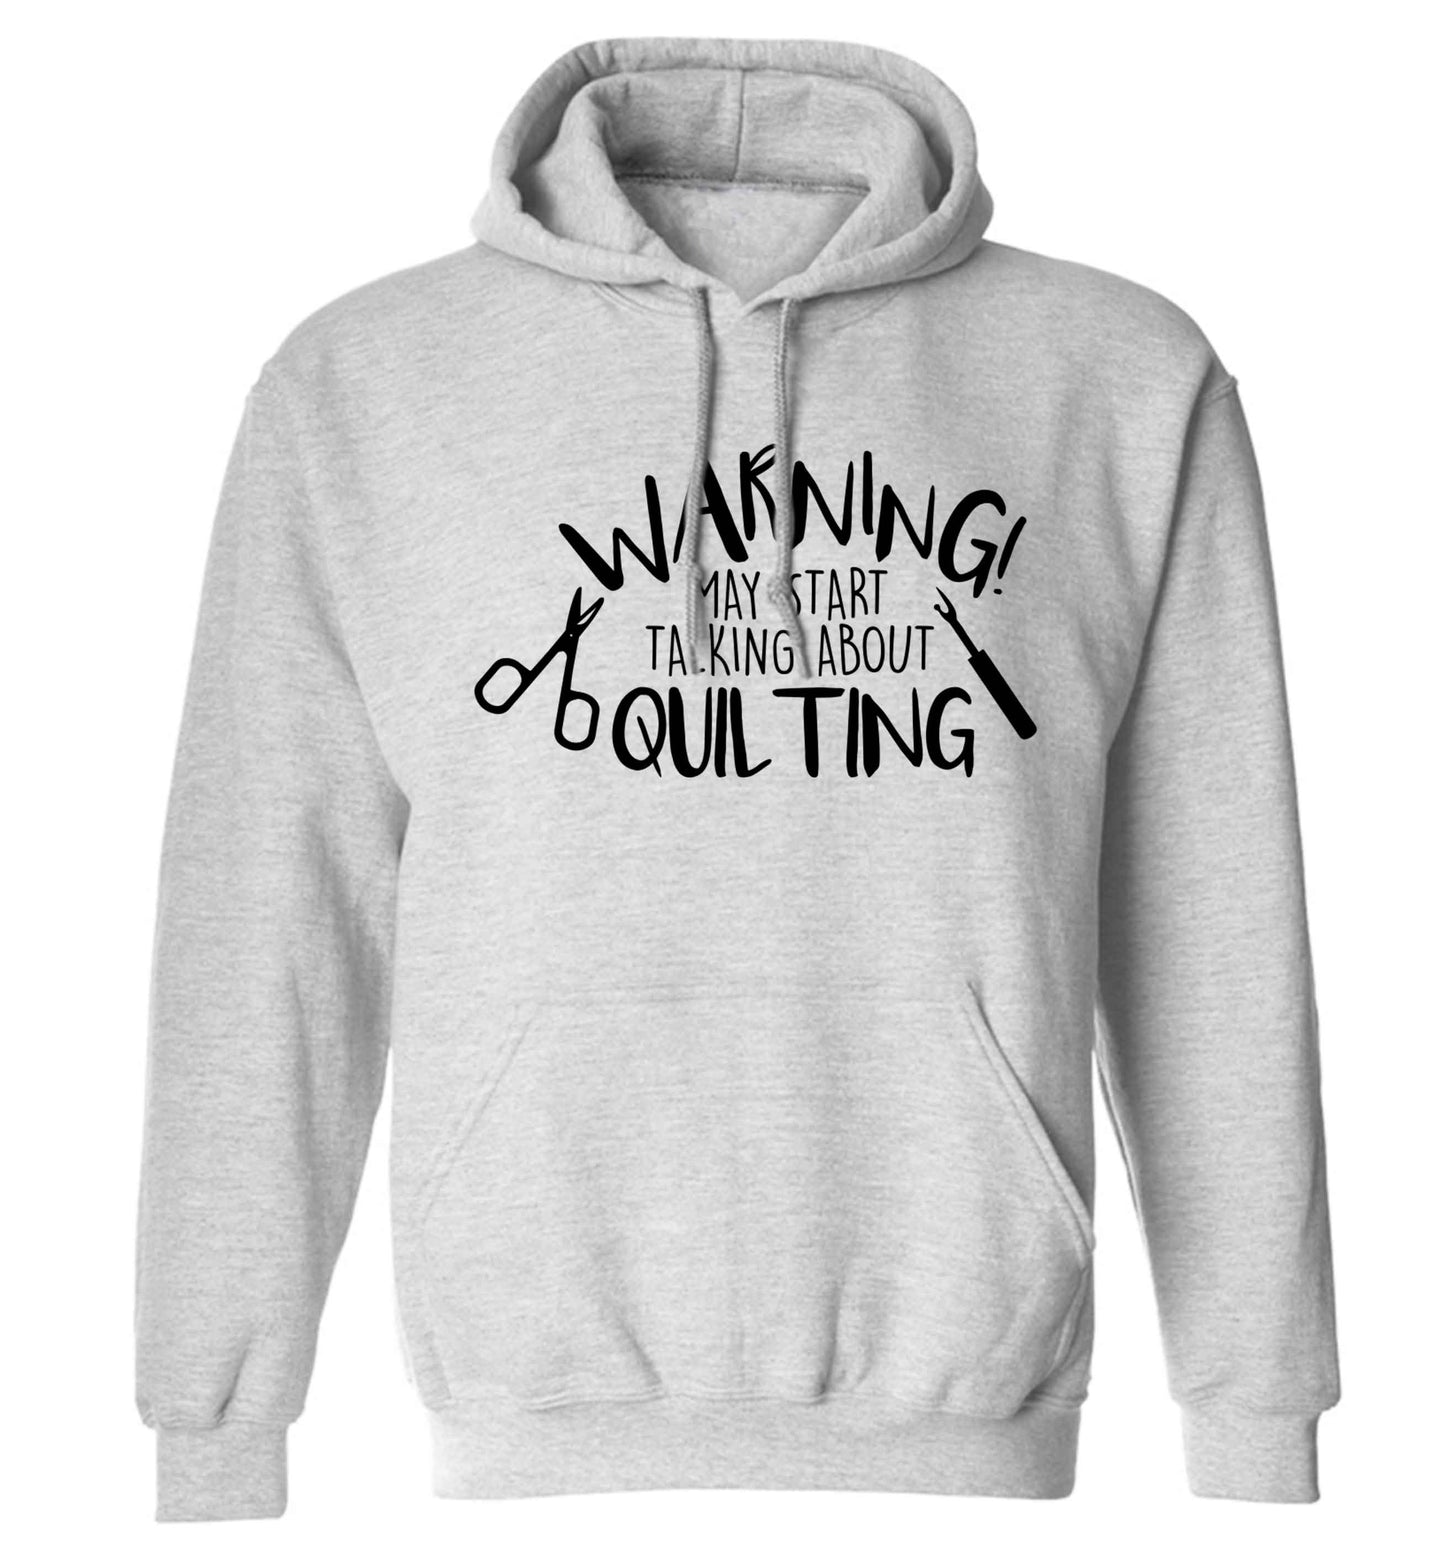 Warning may start talking about quilting adults unisex grey hoodie 2XL